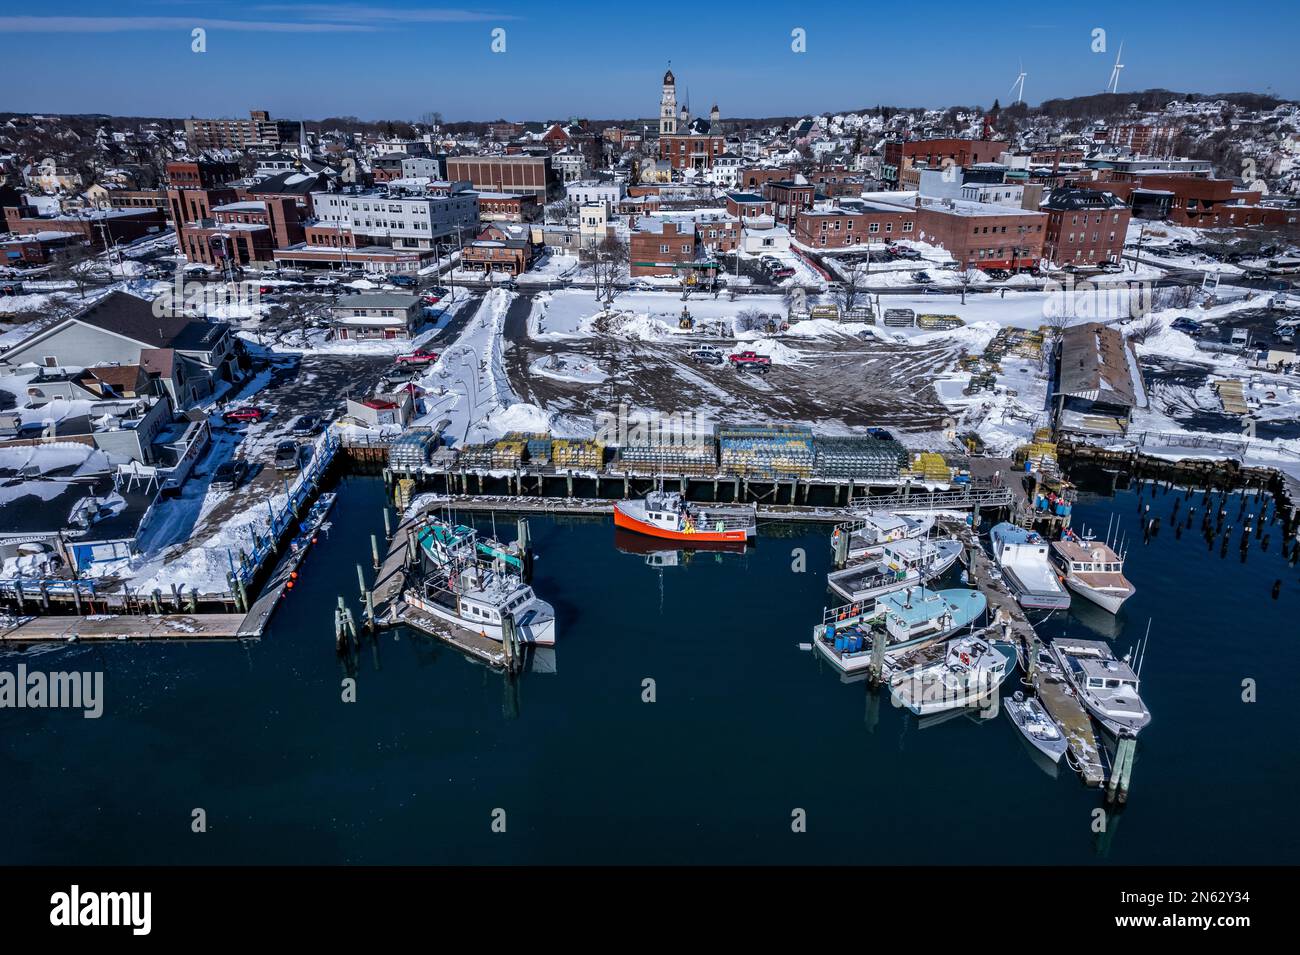 Aerial view of Gloucester, Massachusetts in winter Stock Photo